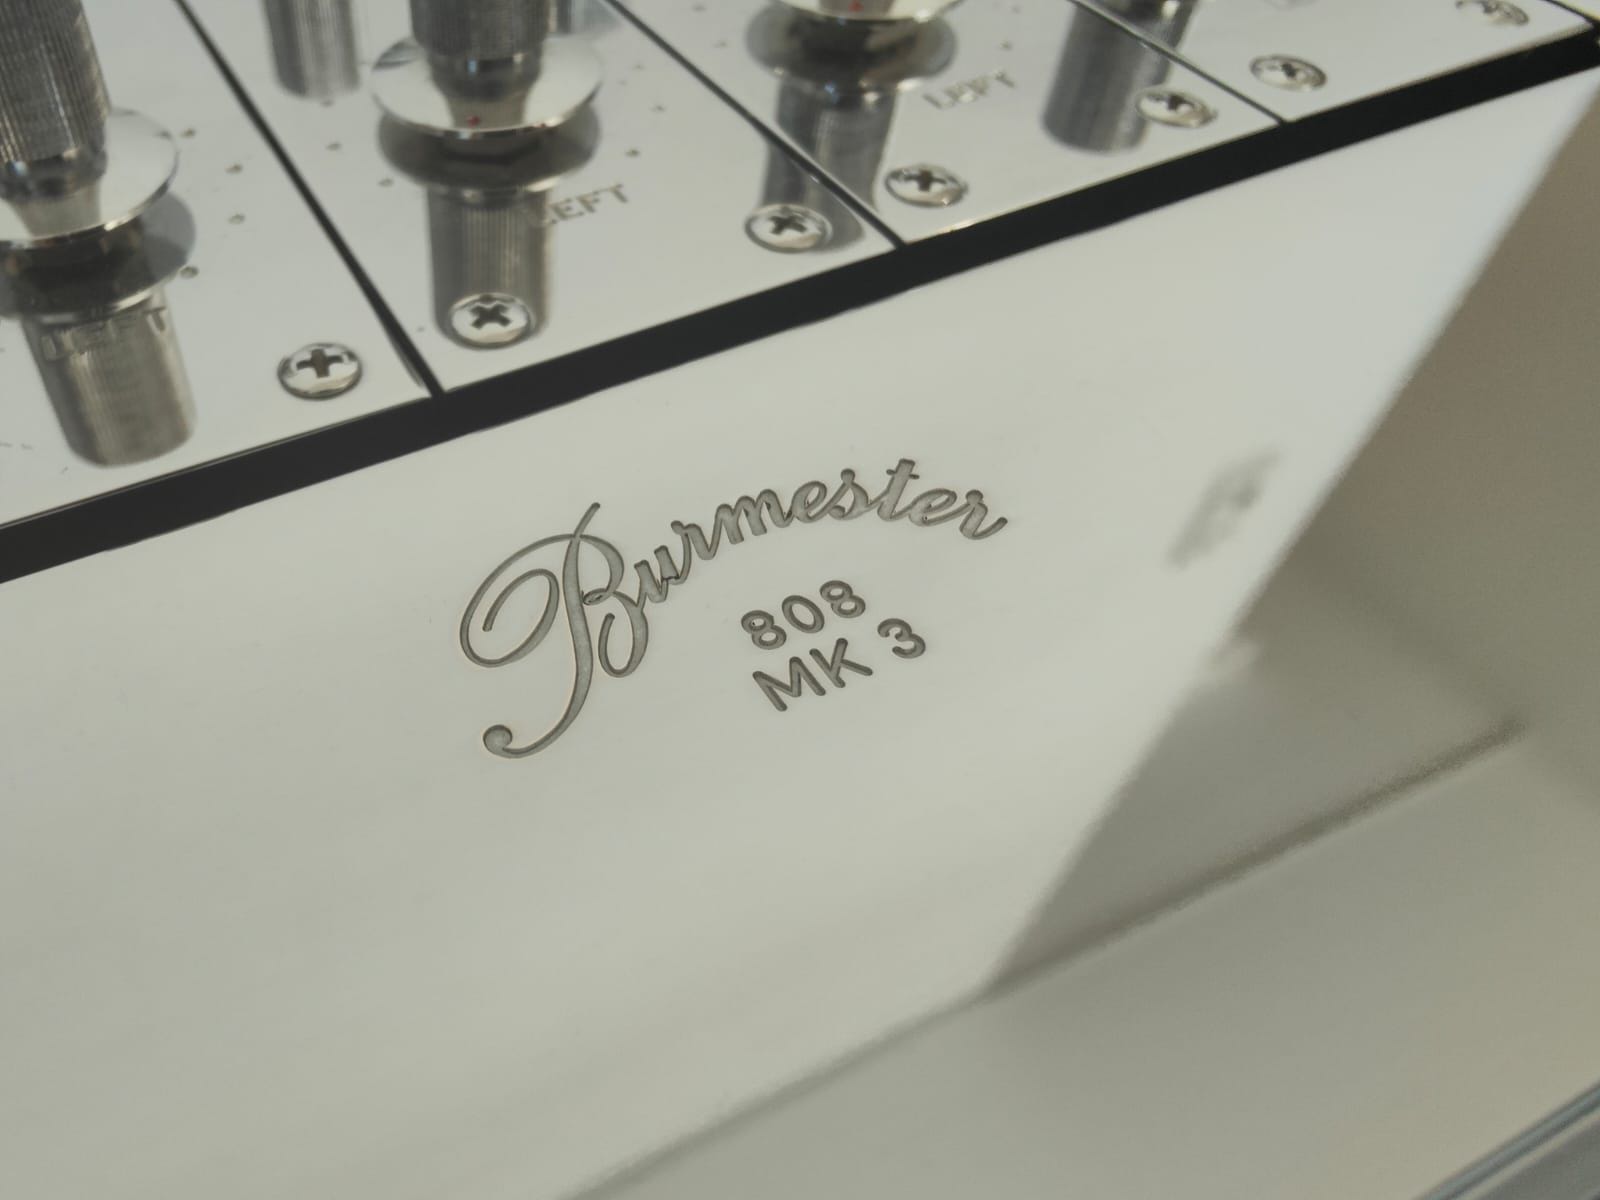 Burmester 808 mkIII High End pre amplifier with modules 3